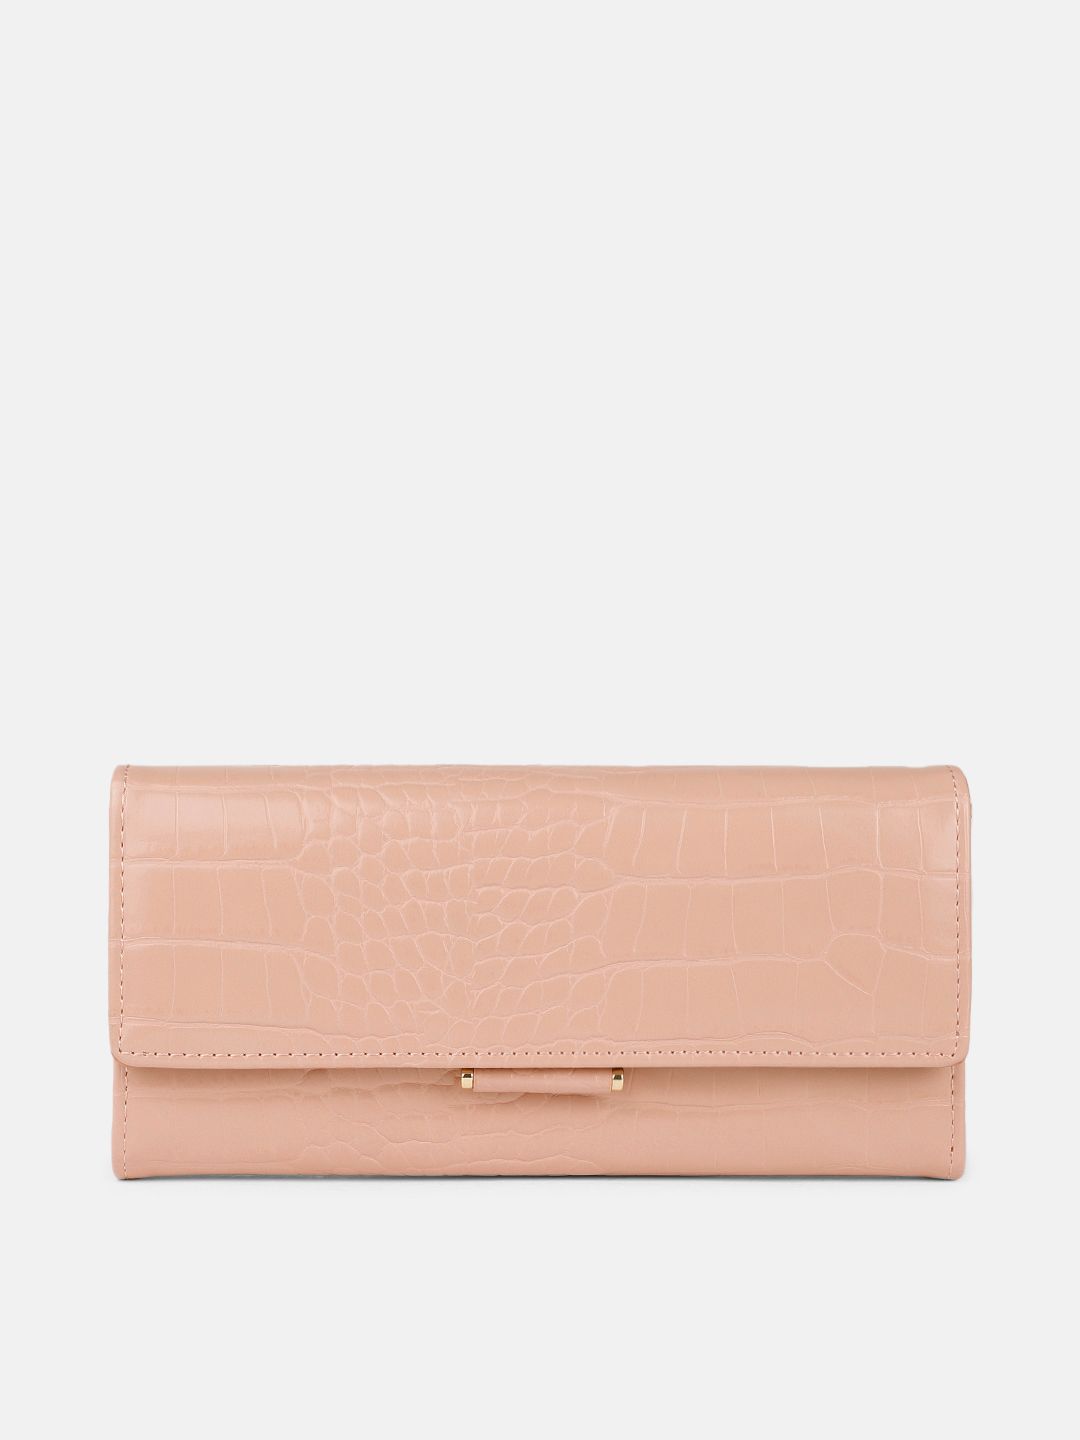 Mast & Harbour Women Peach-Coloured PU Three Fold Wallet Price in India